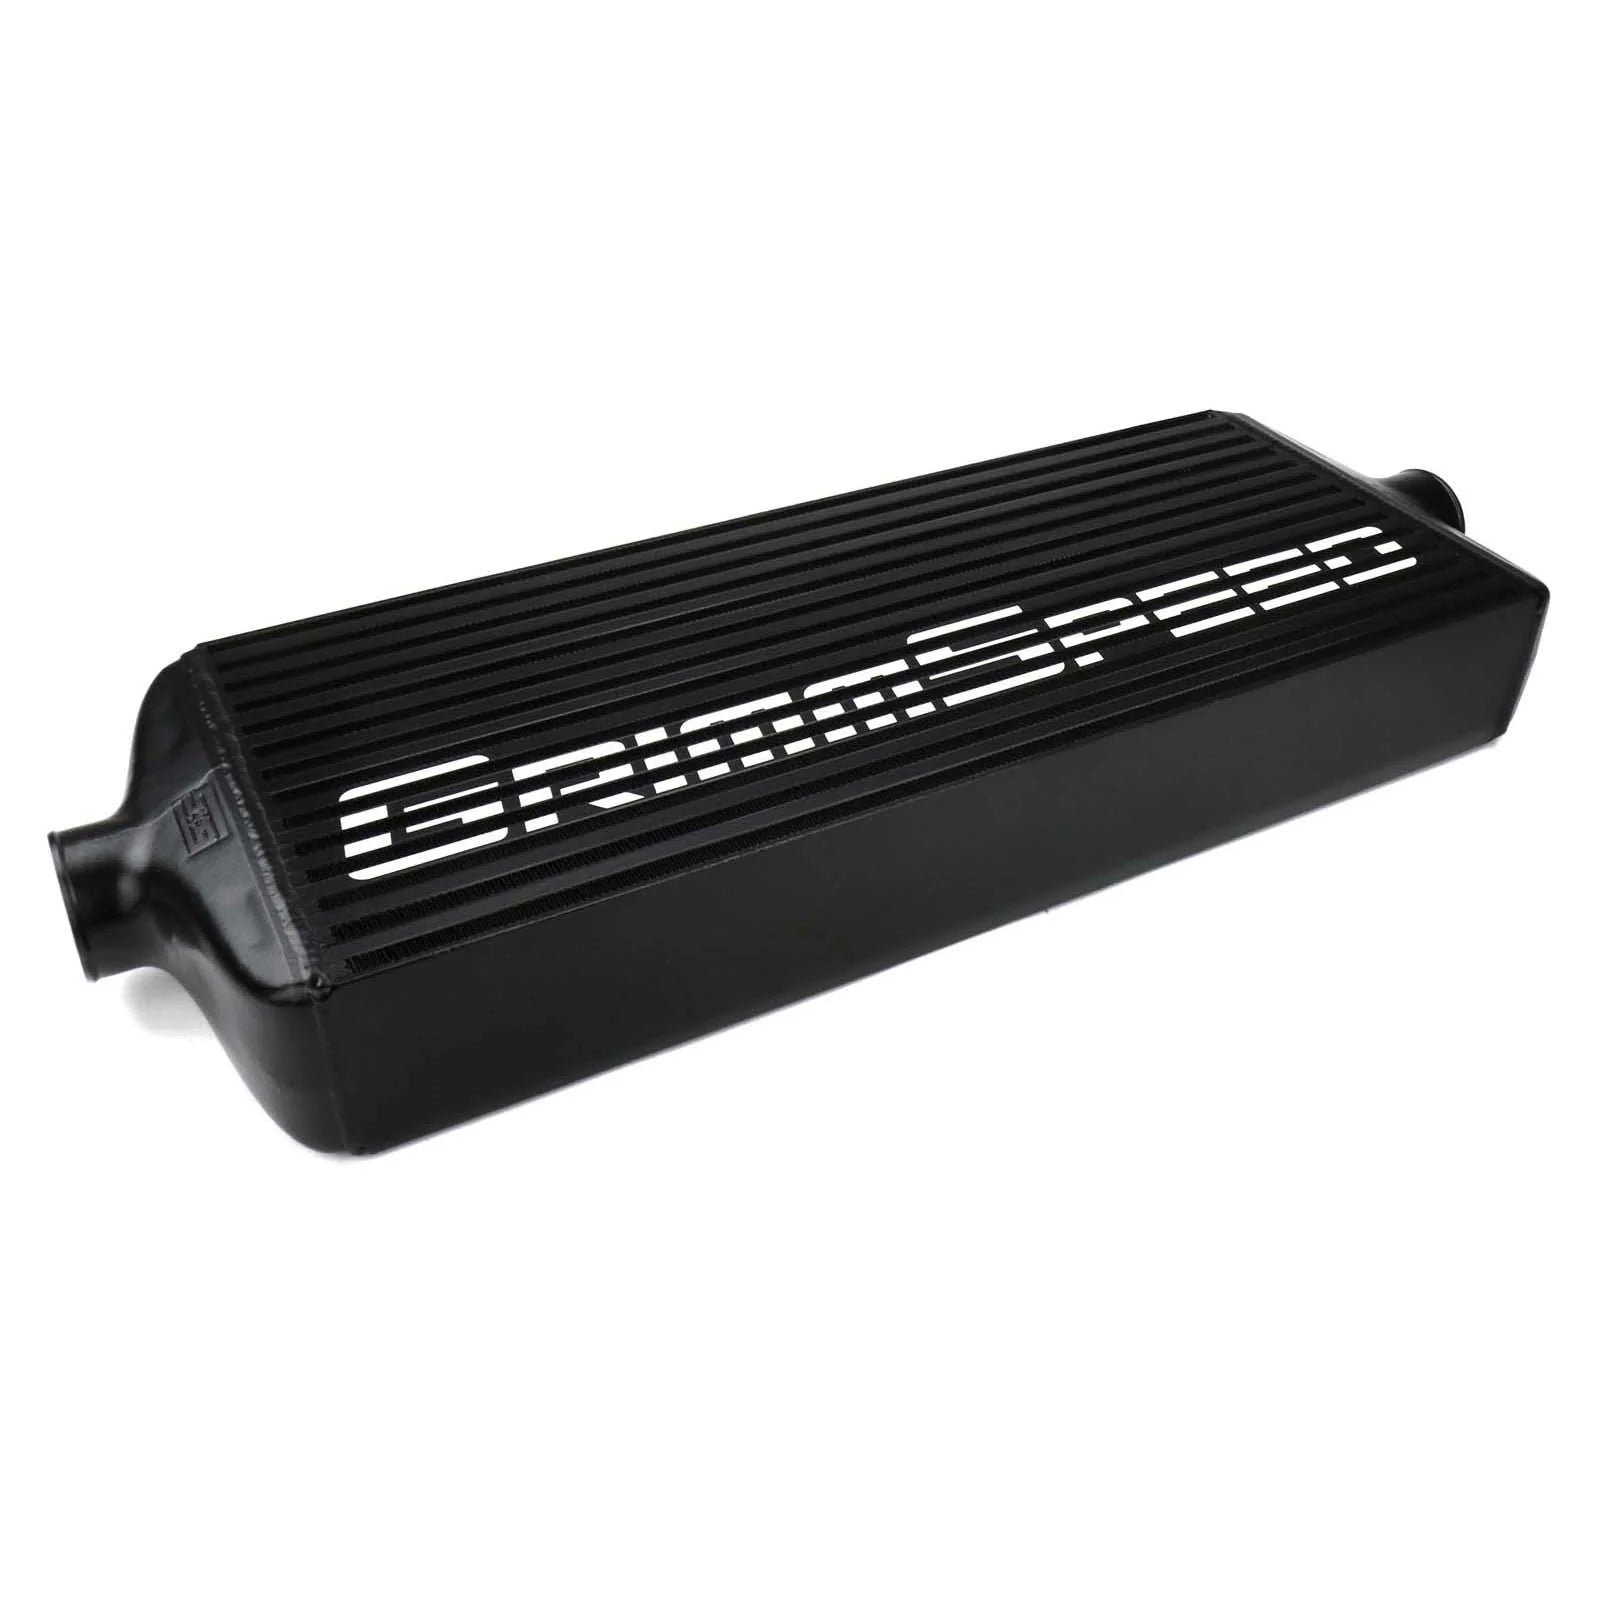 GrimmSpeed Front Mount Intercooler Kit - Black Core with Red Piping - 2008-14 Subaru STI